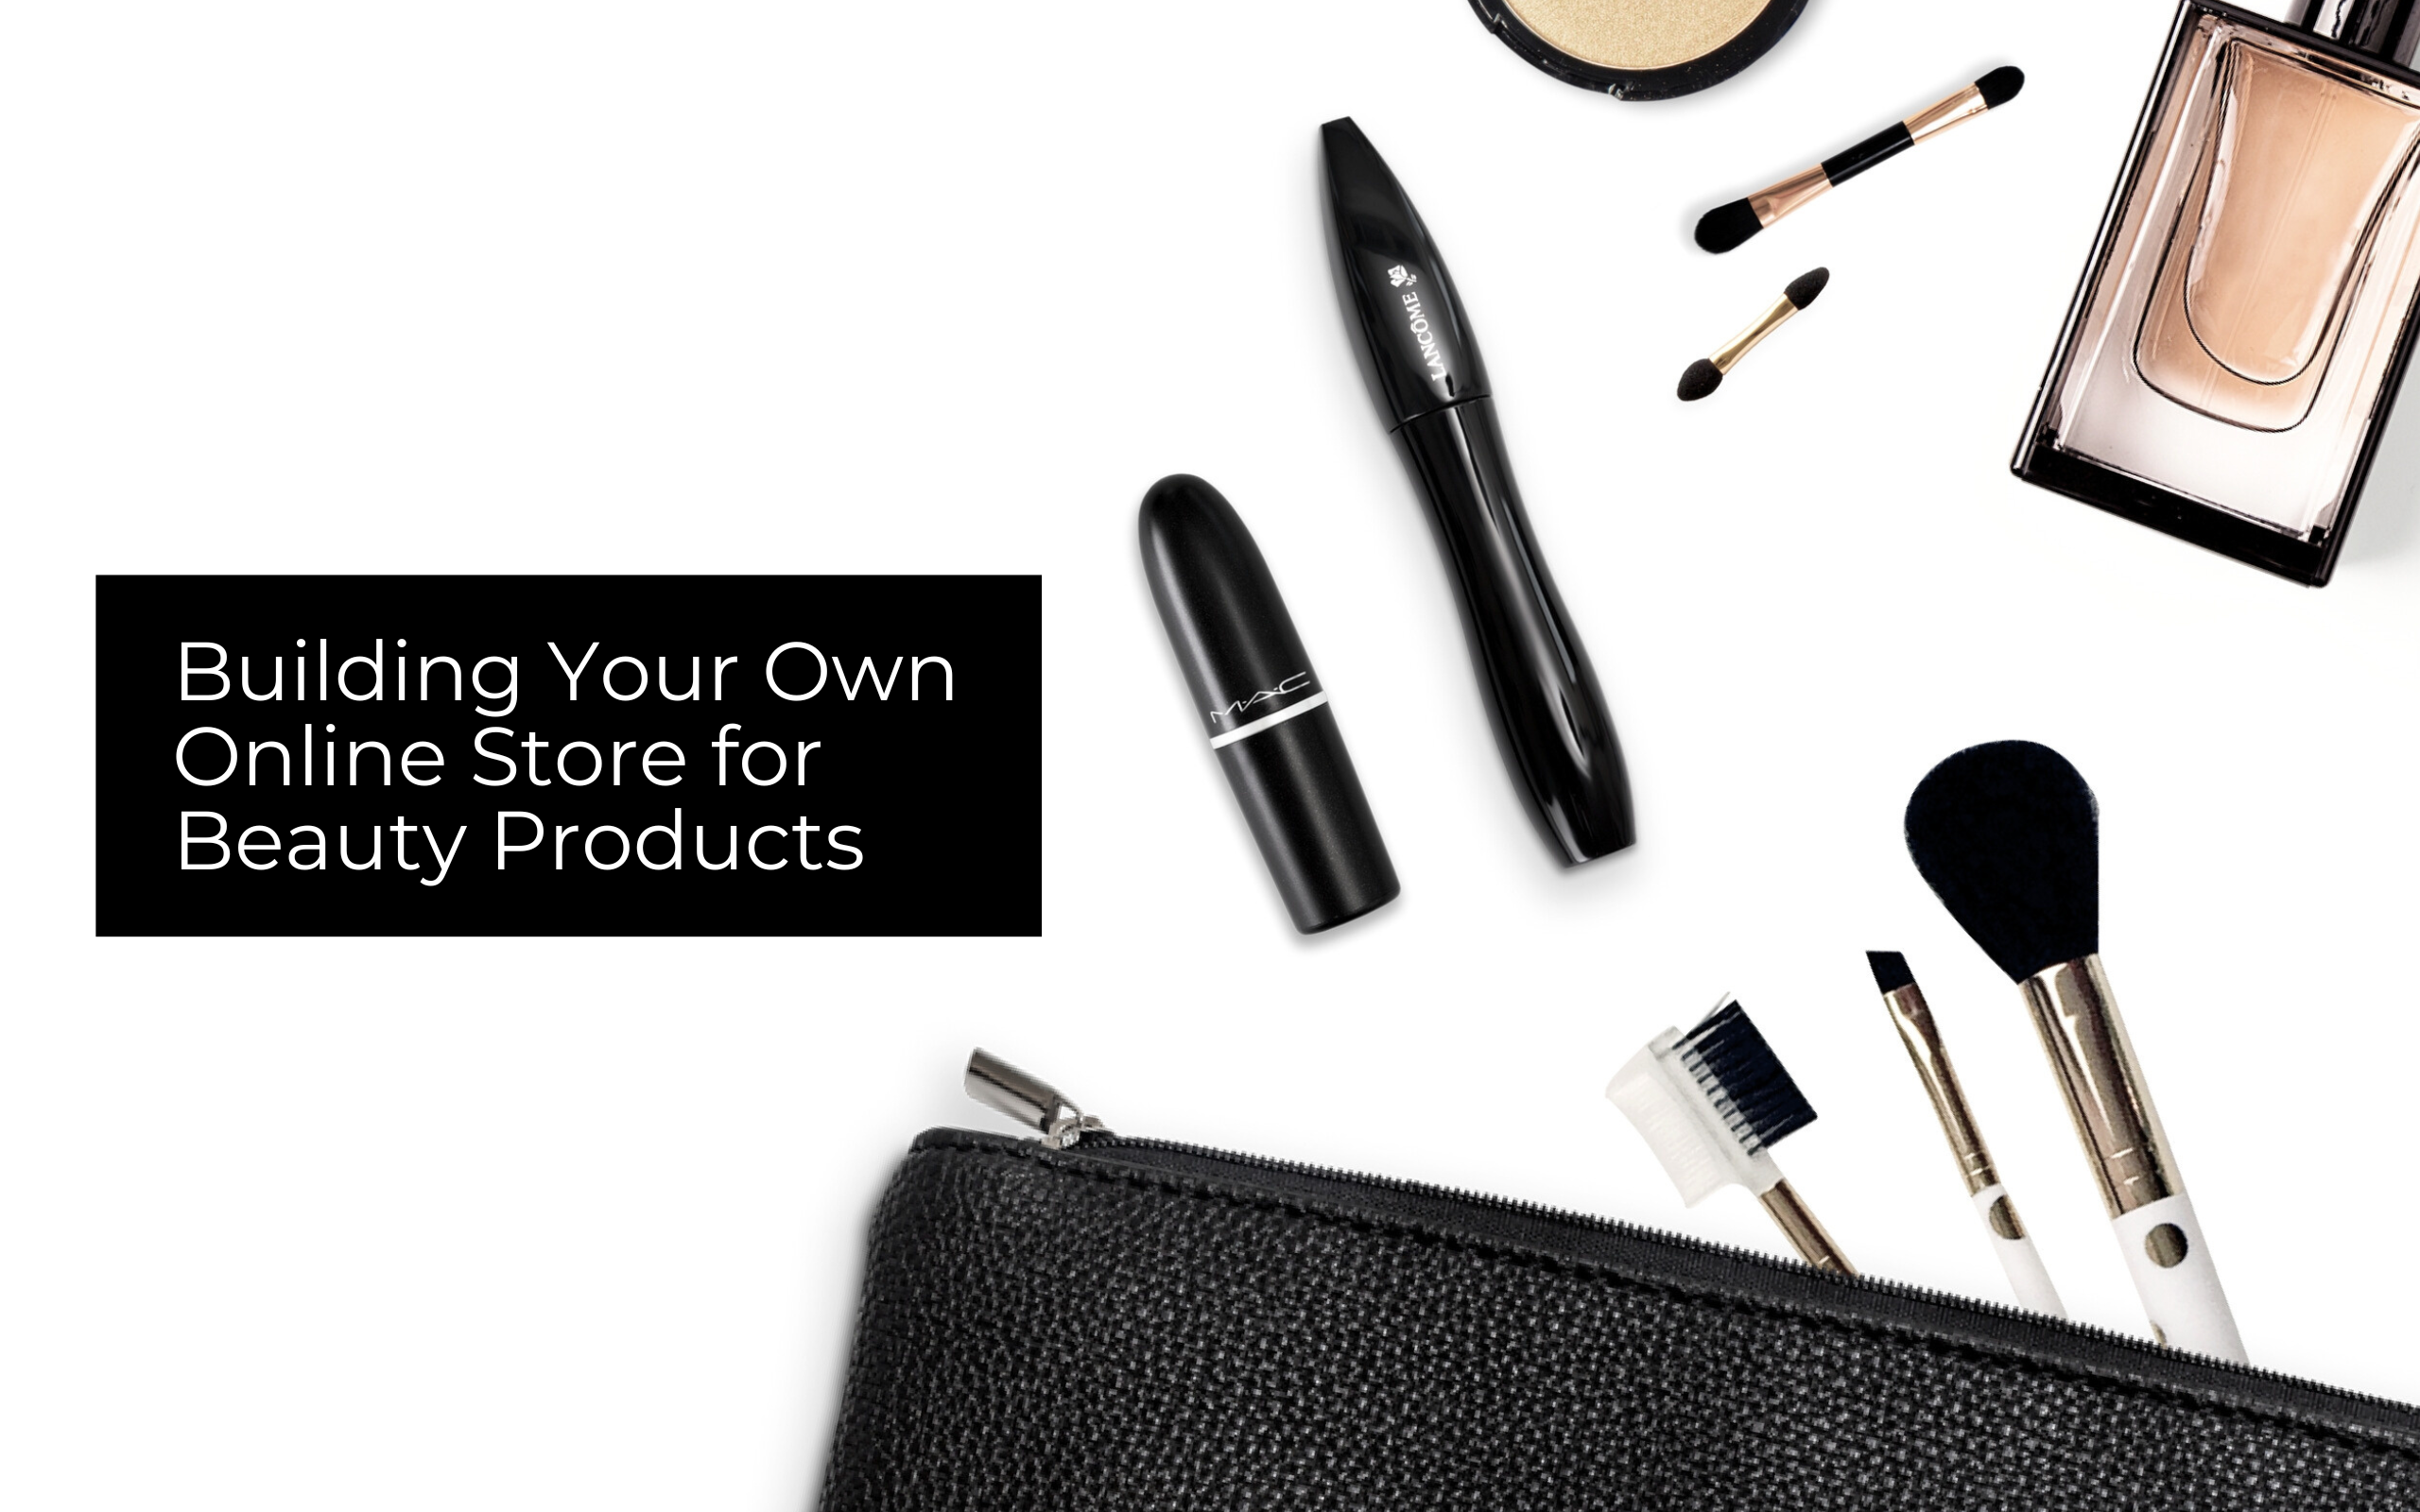 Makeup with bag, building your own online store for beauty products, beauty products, brush, eyeliner 